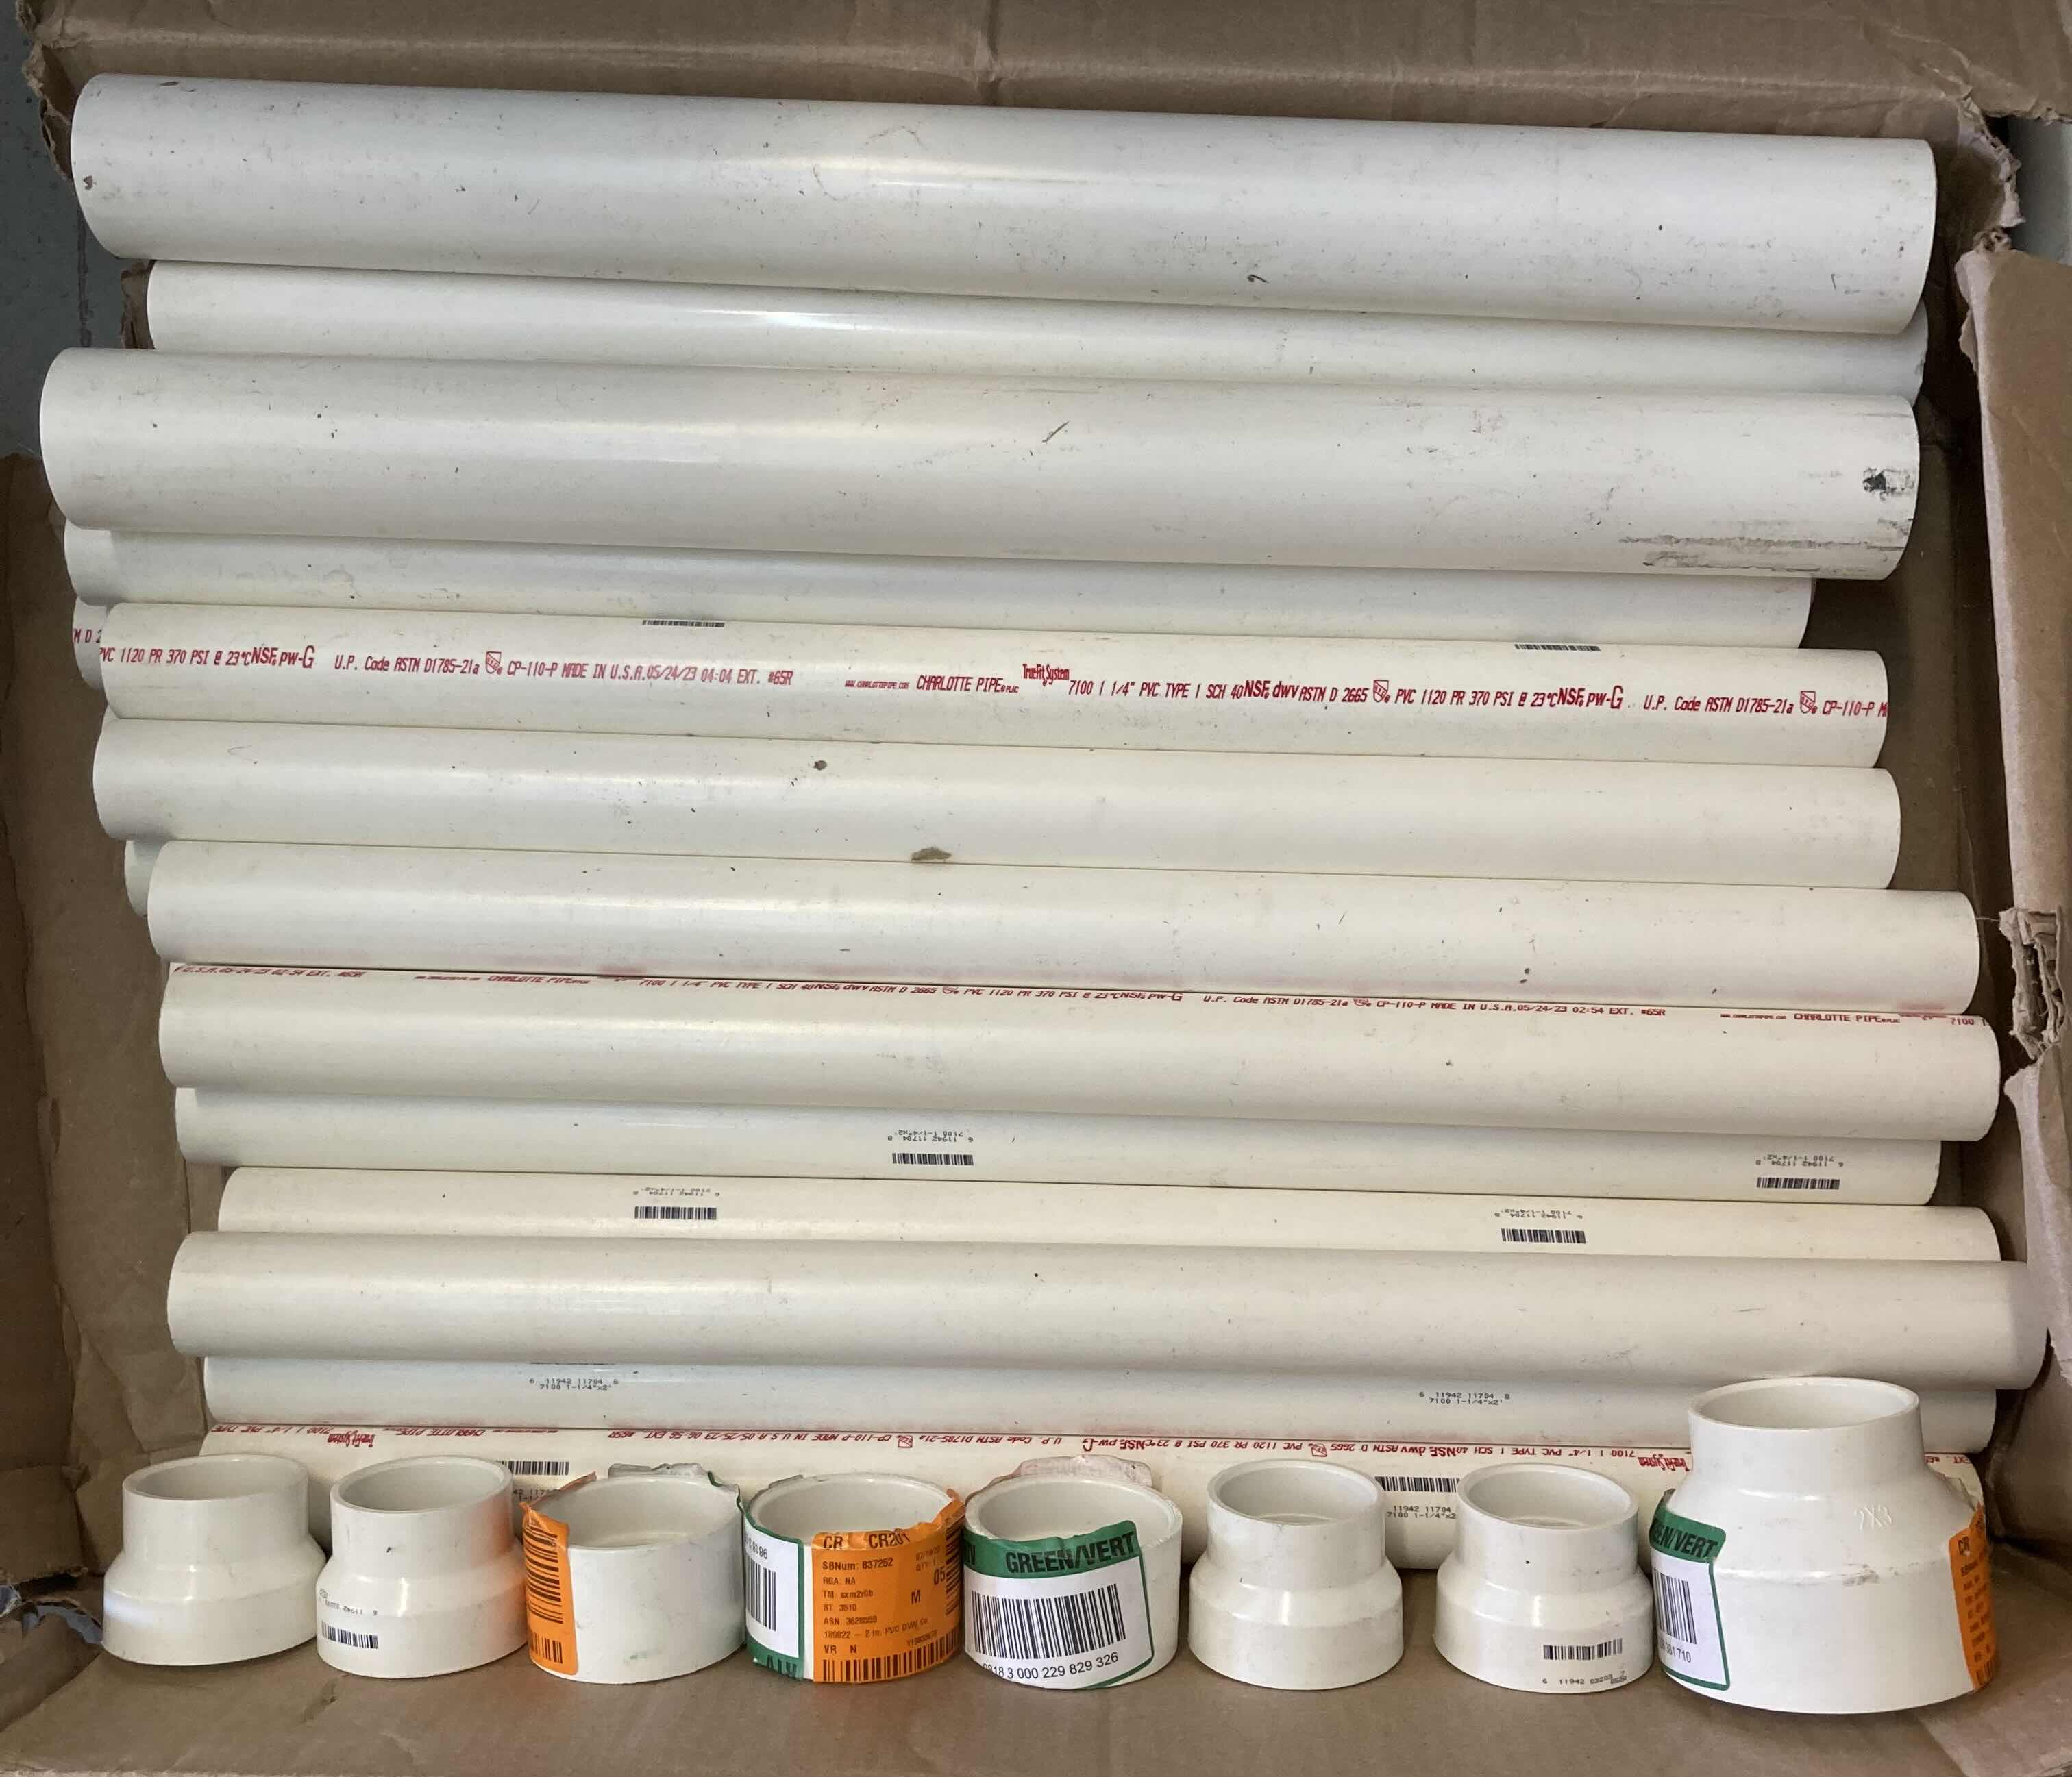 Photo 1 of Charlotte  PVC PIPES 1-1/4” X 24” (19) & PVC PIPES 2.25” X 24” (2) W 2” COUPLINGS & ADAPTER COUPLINGS